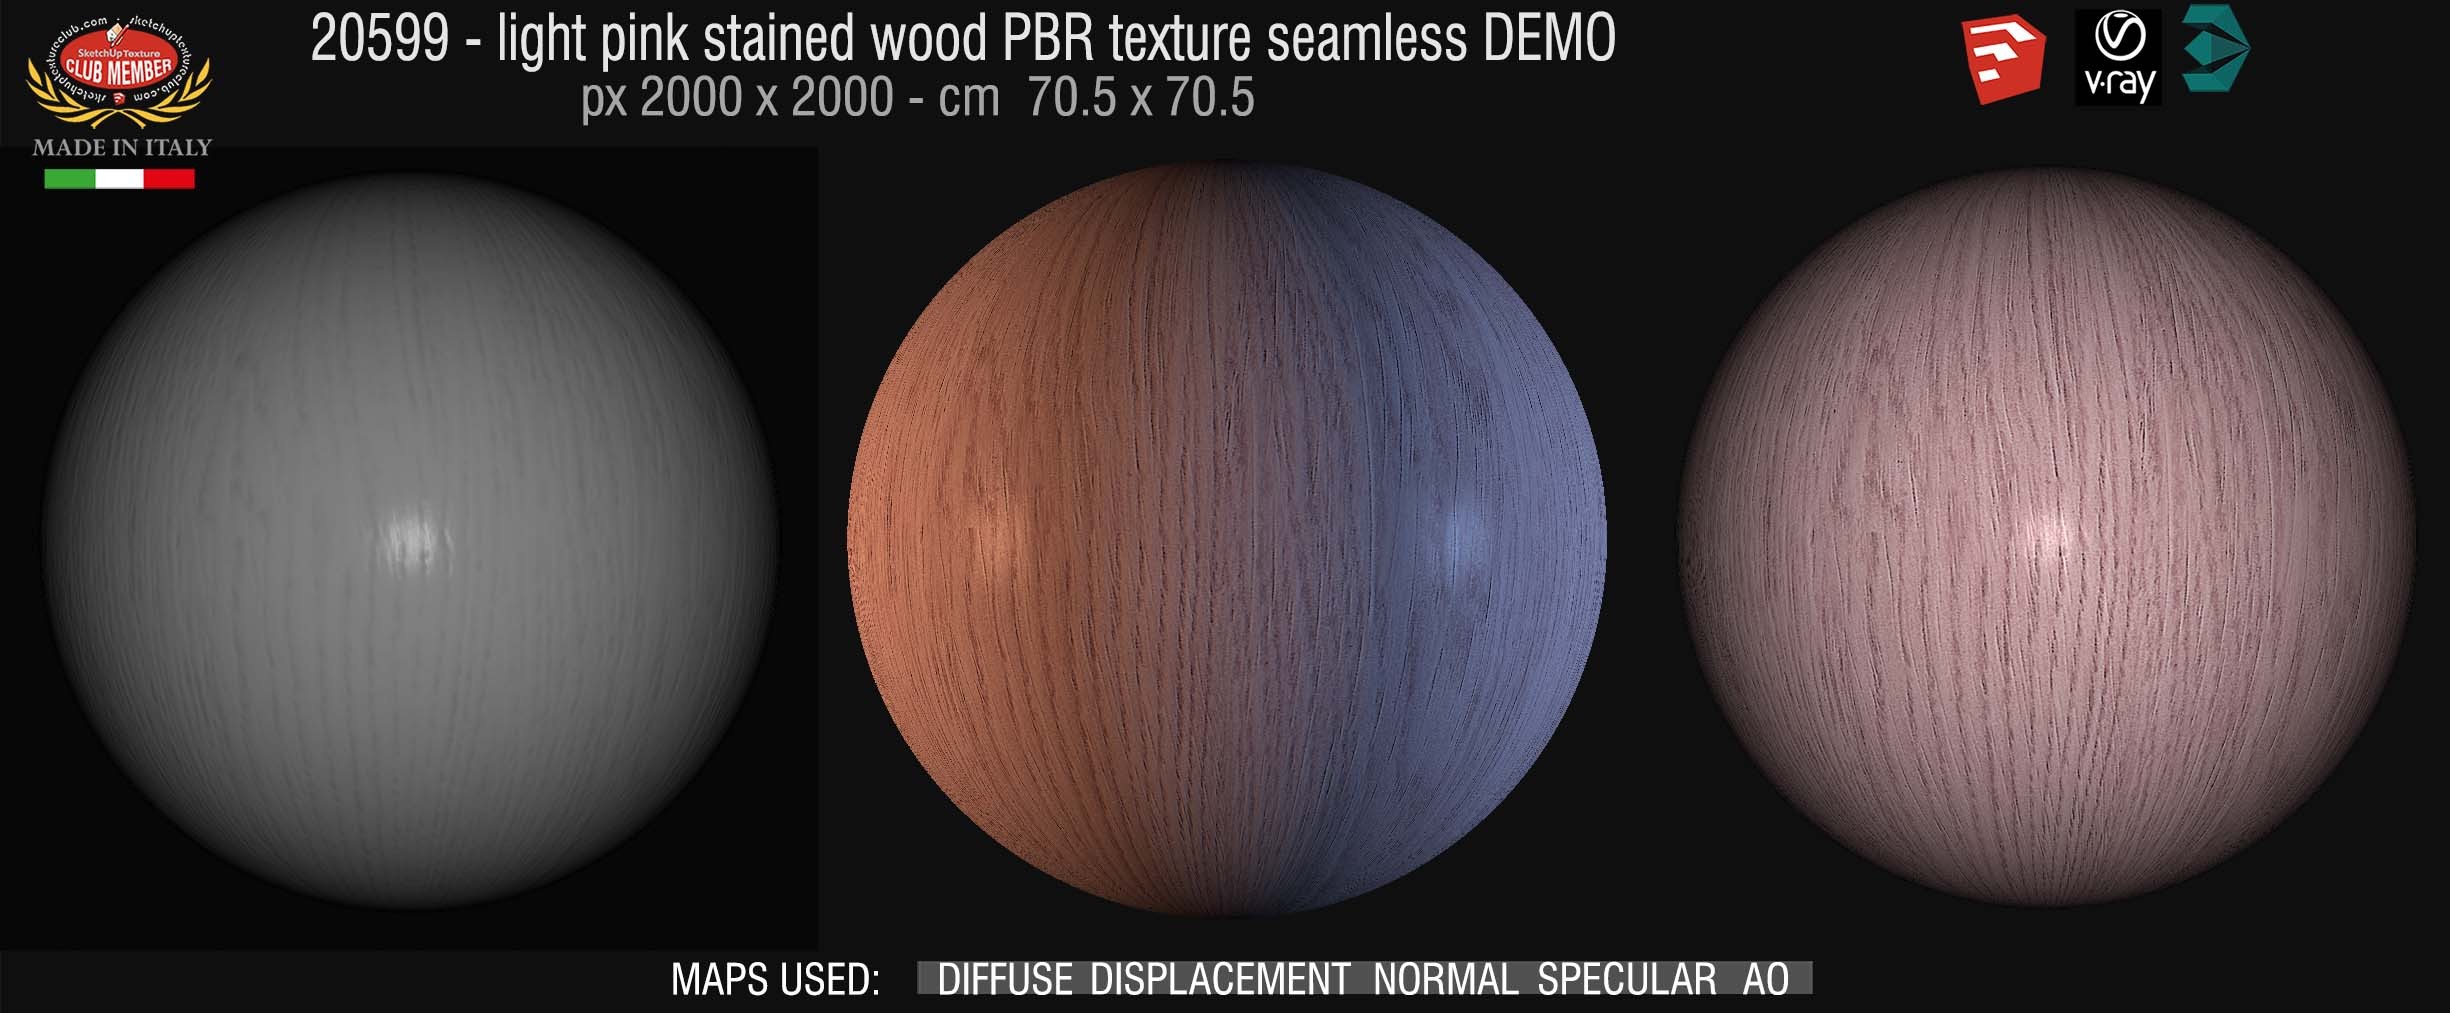 20599 light pink stained wood PBR texture seamless DEMO